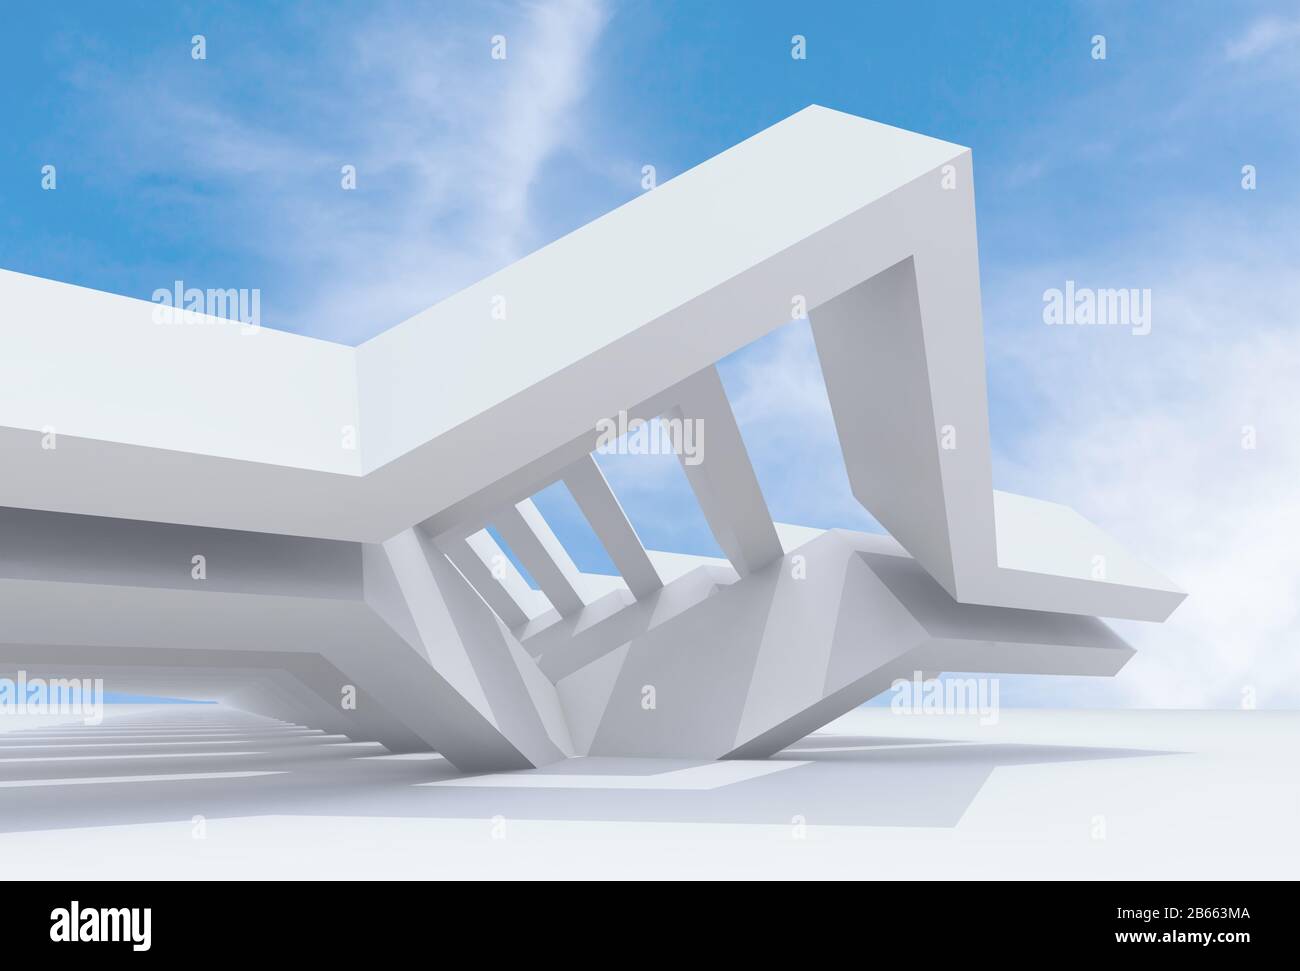 Abstract minimal background with white parametric installation. 3d rendering illustration Stock Photo